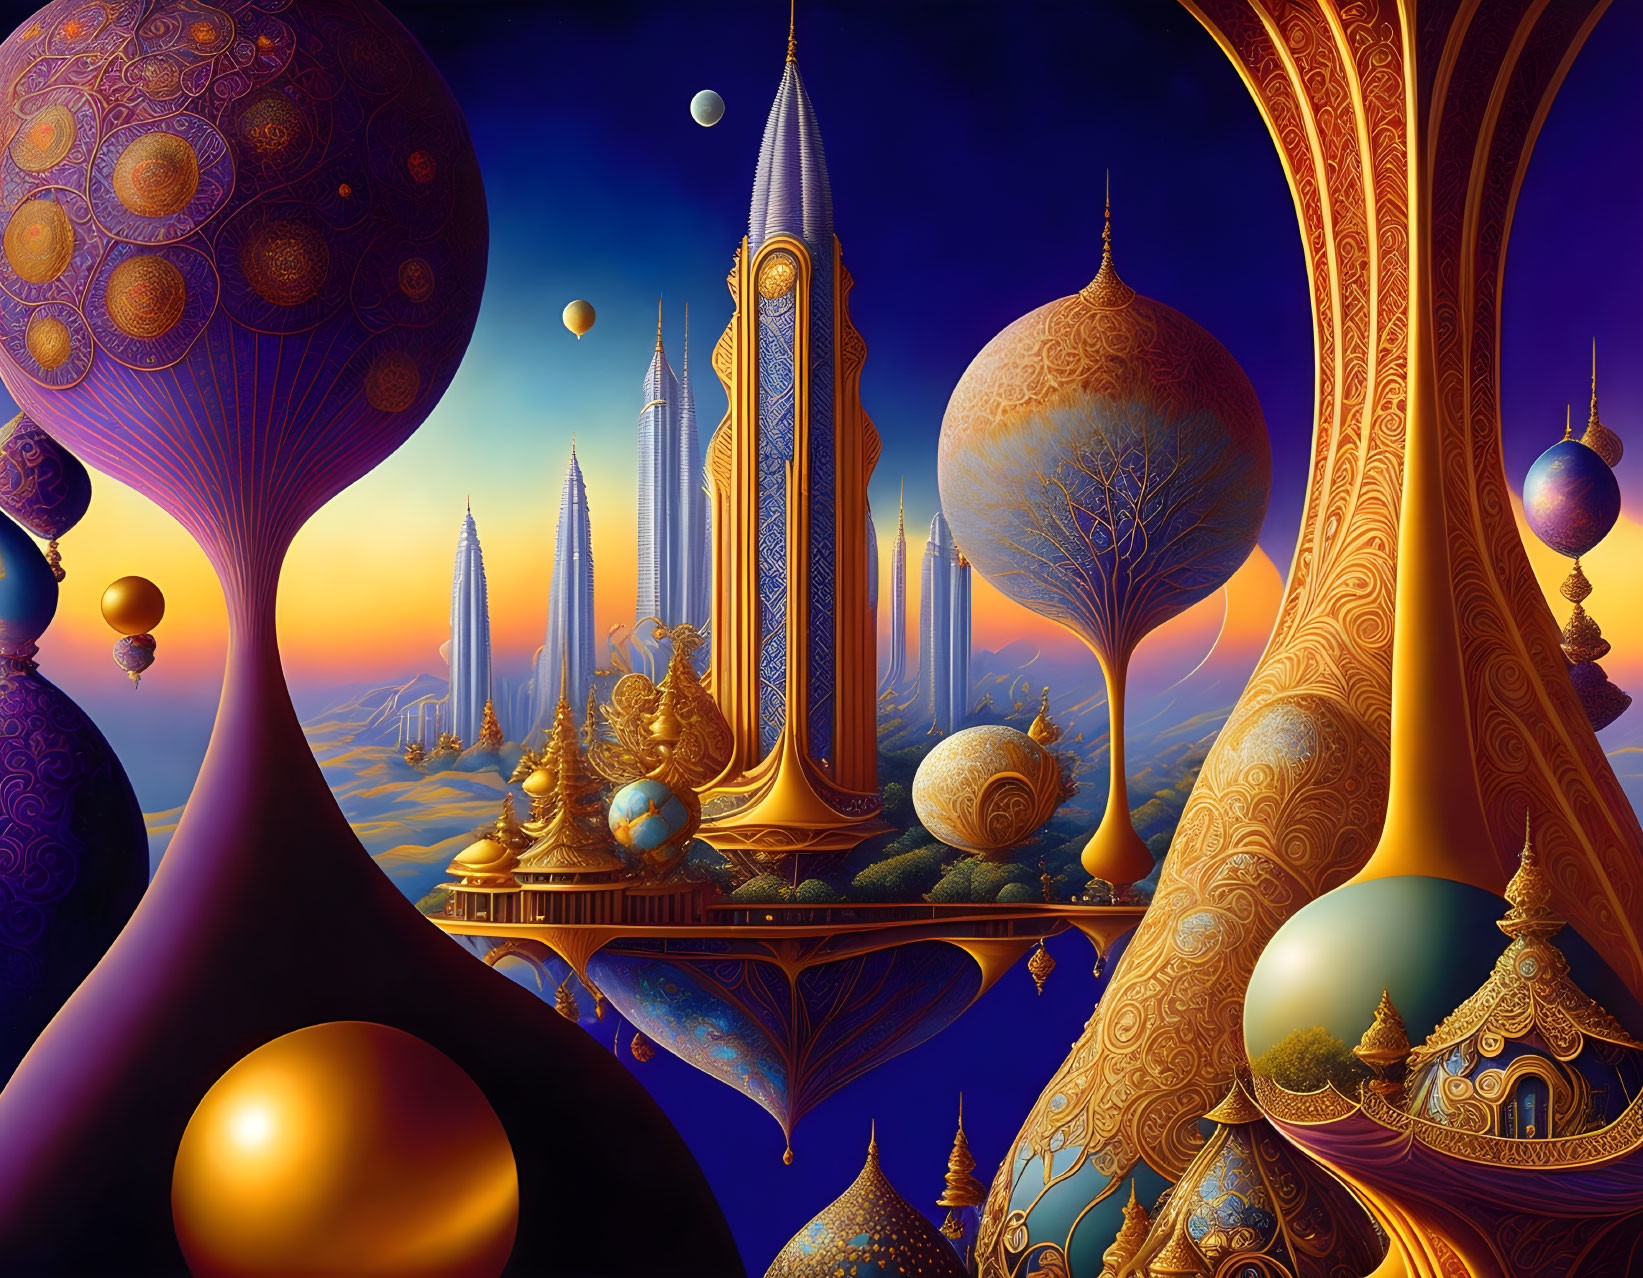 Fantastical landscape with golden towers, floating orbs, intricate trees, and multiple moons